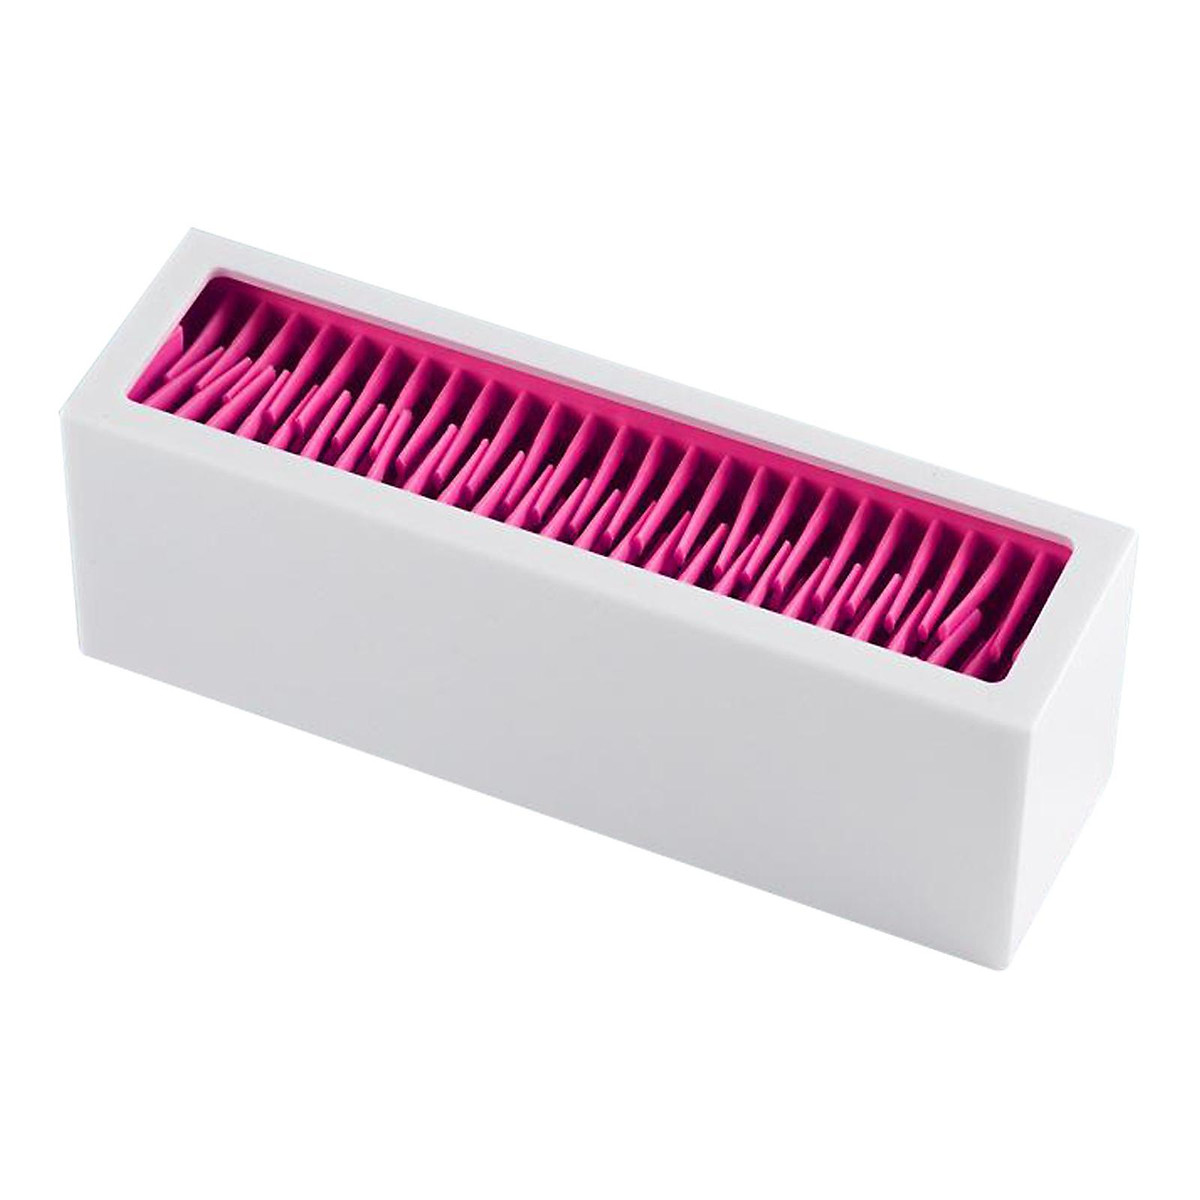 Makeup Brushes Holder Silicone Storage Rack for Cosmetic Tools - Dụng cụ  trang điểm